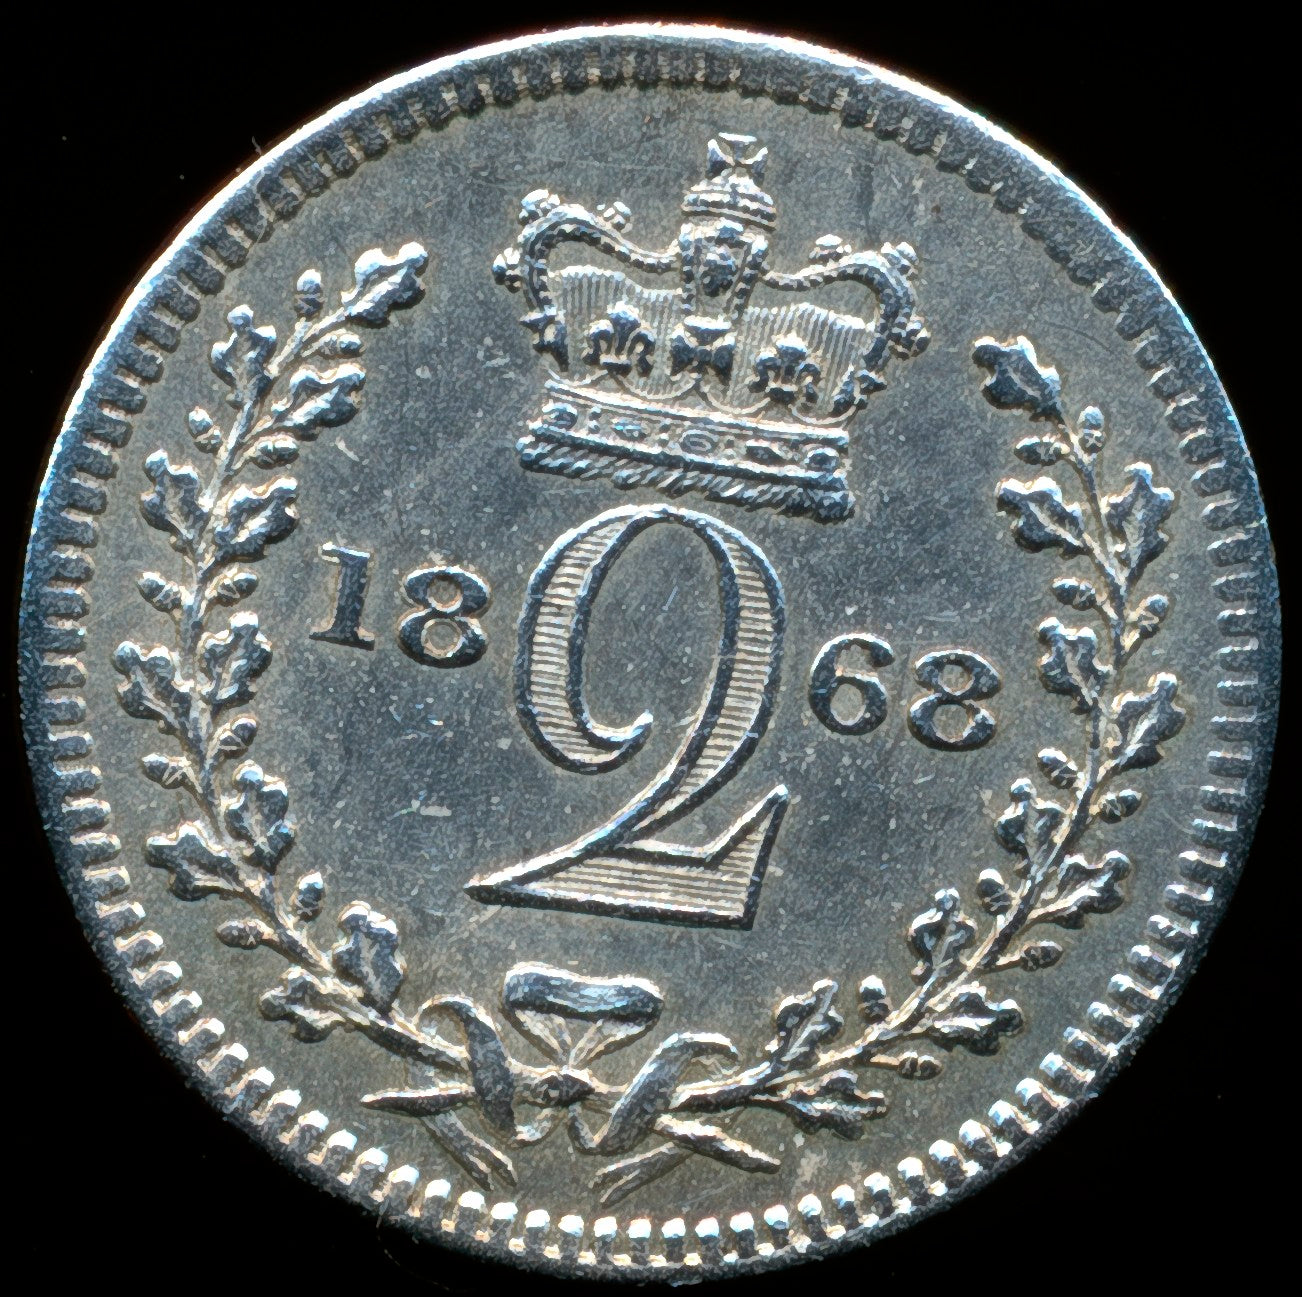 1868 Maundy set S3916 ESC 3518 in a dated box AUNC